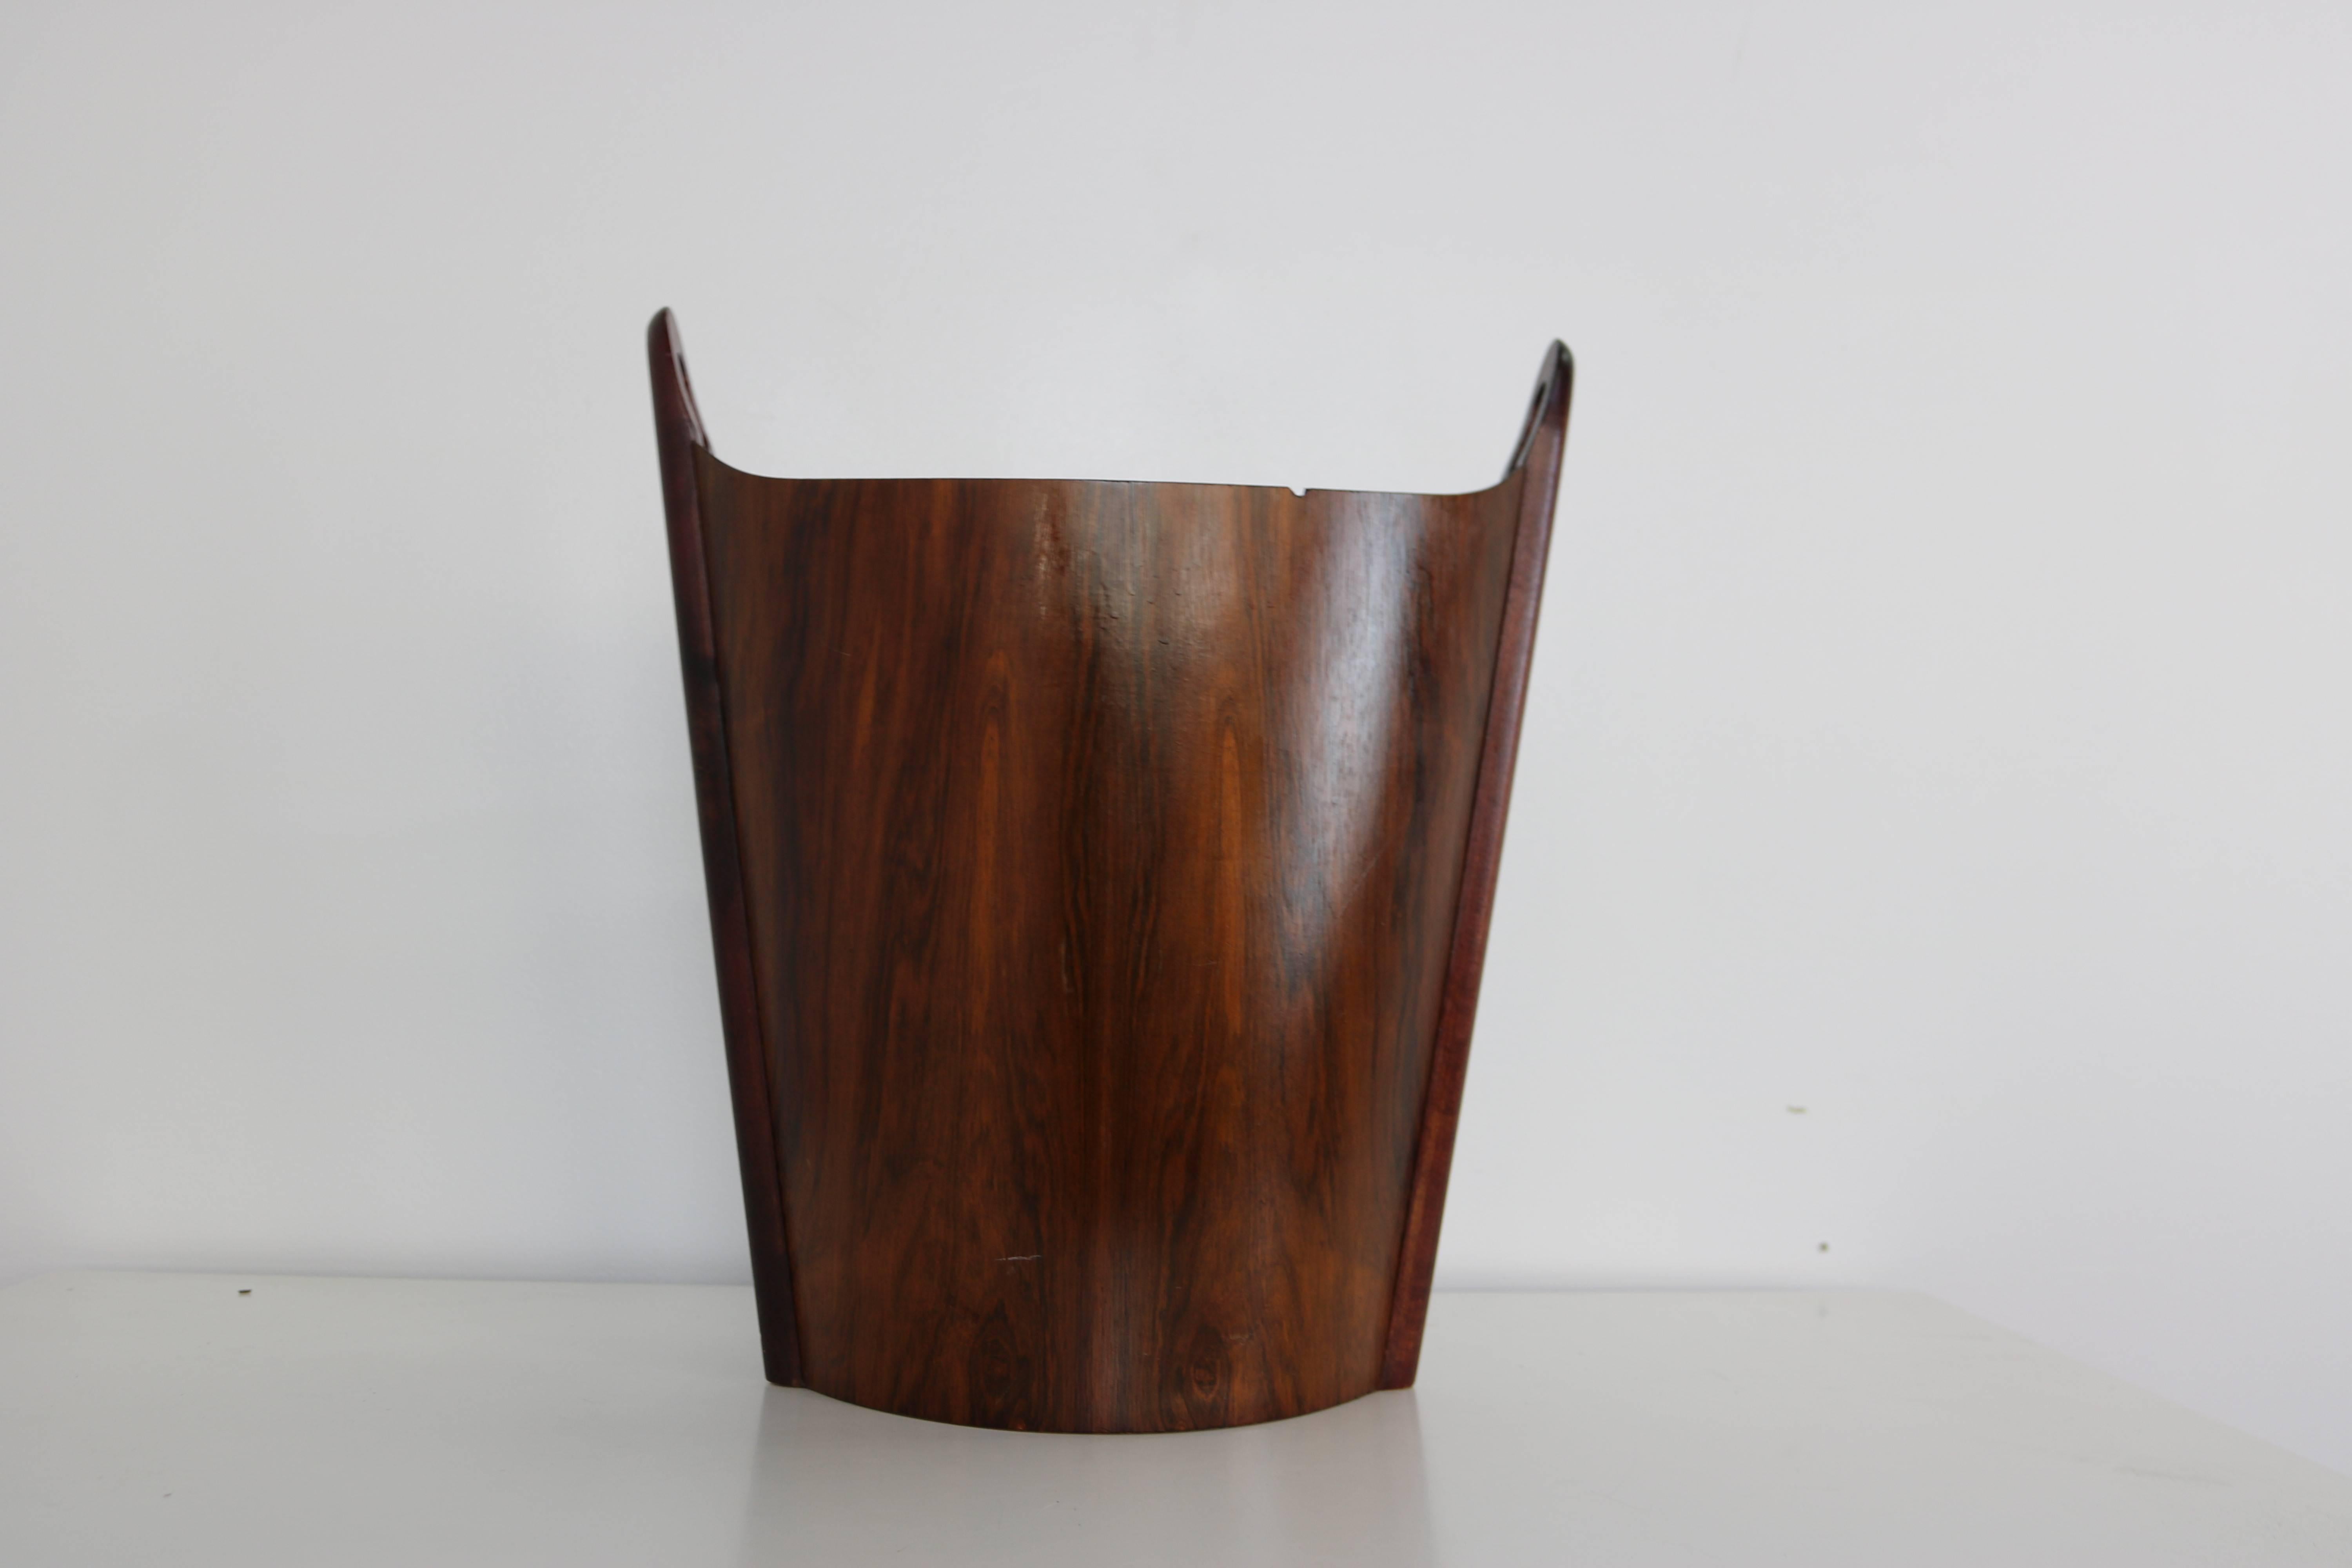 Lovely sculptural wastepaper basket made in Norway. Maker's mark inside. One small chip to rim. Presents wonderfully.